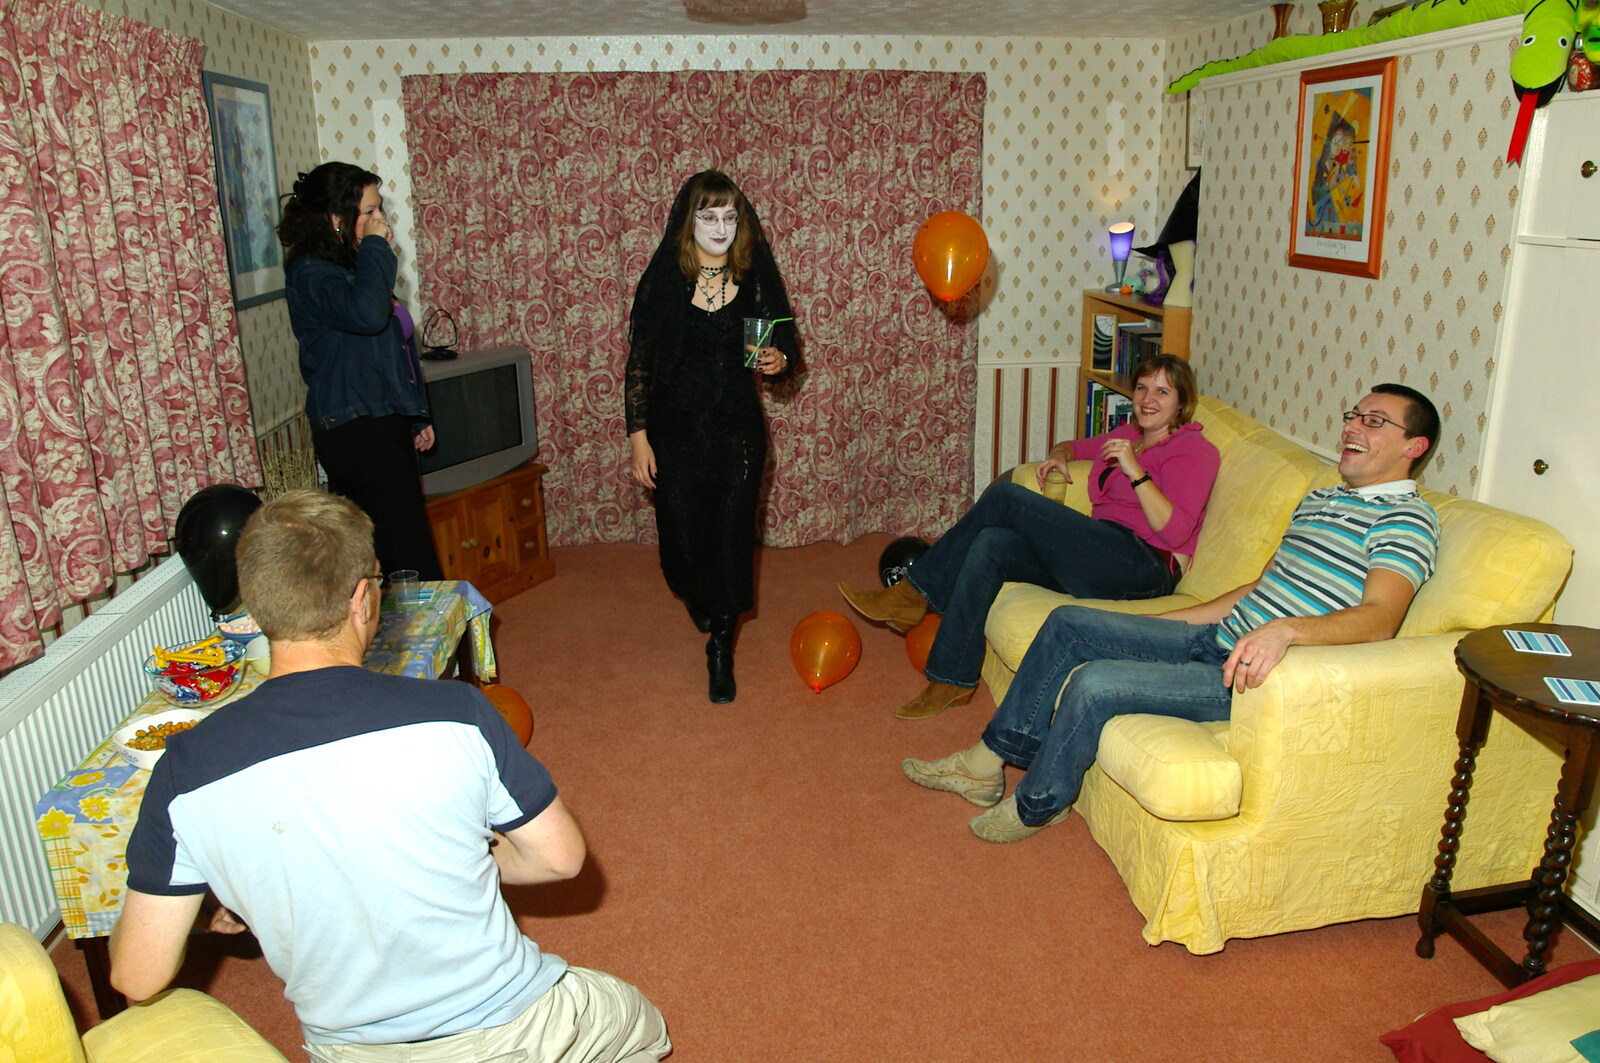 Jen's Hallowe'en Party and Sazzle's Leaving Do, Mission Road, Diss - 28th October 2005: Suey roams around